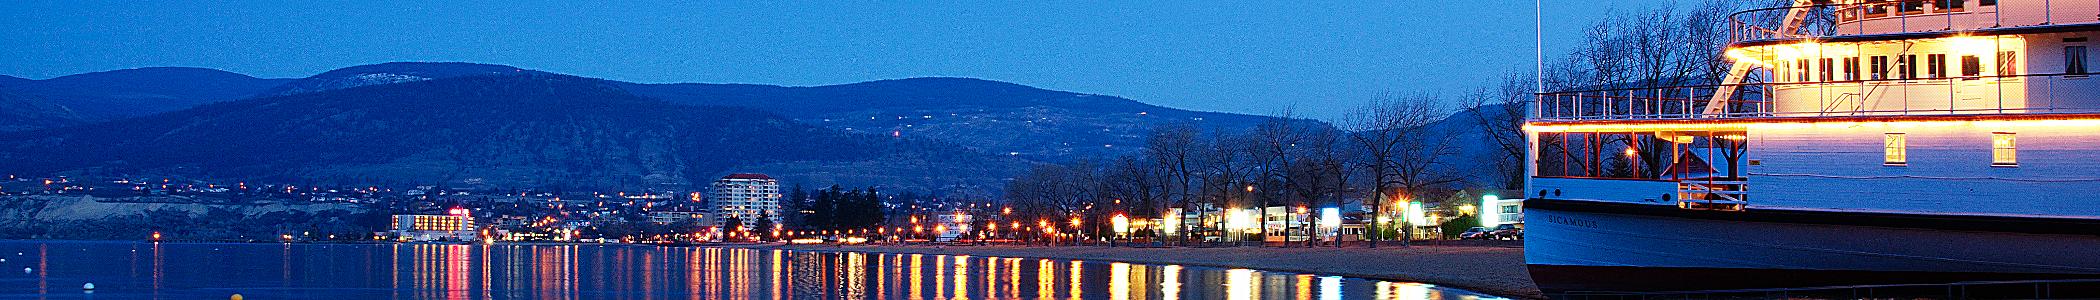 Banner image for Penticton on GigsGuide